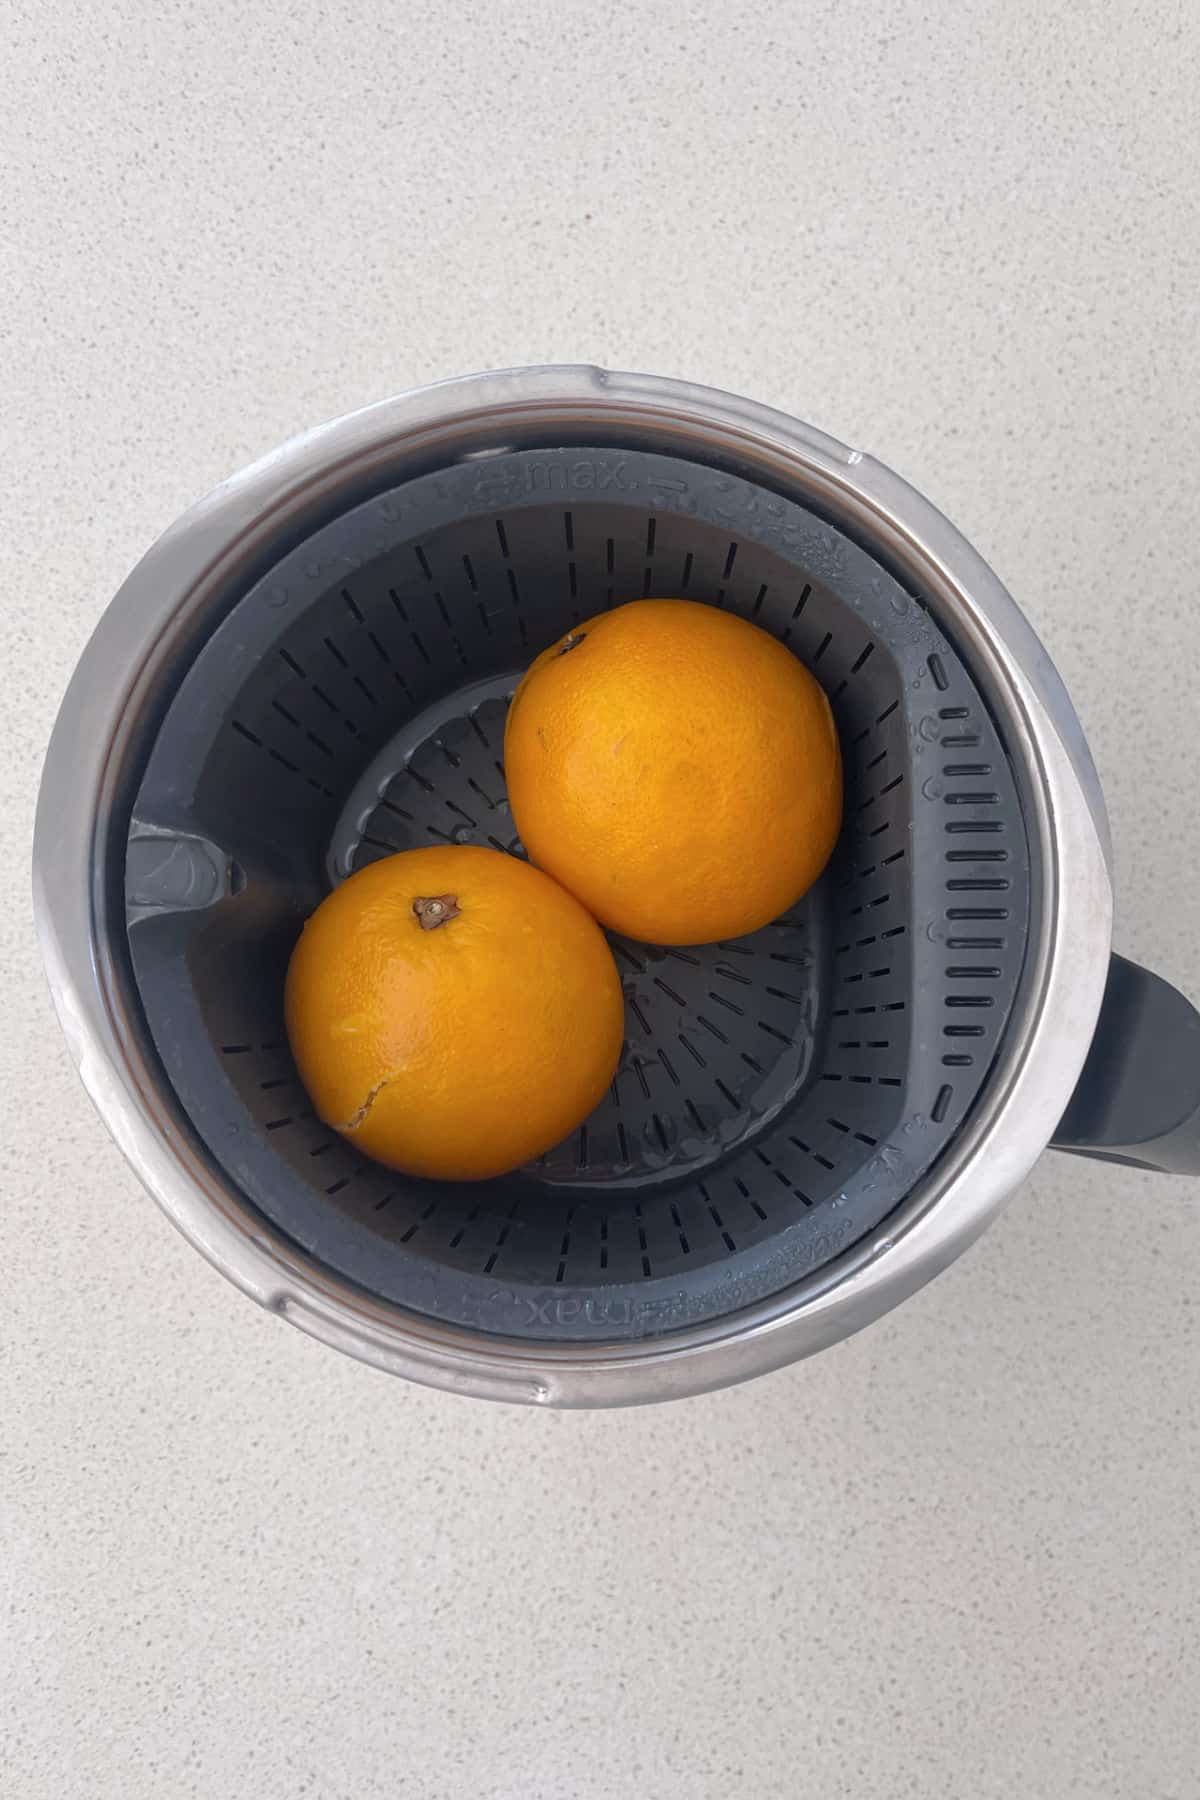 Two cooked oranges sitting in a steaming basked of a Thermomix.